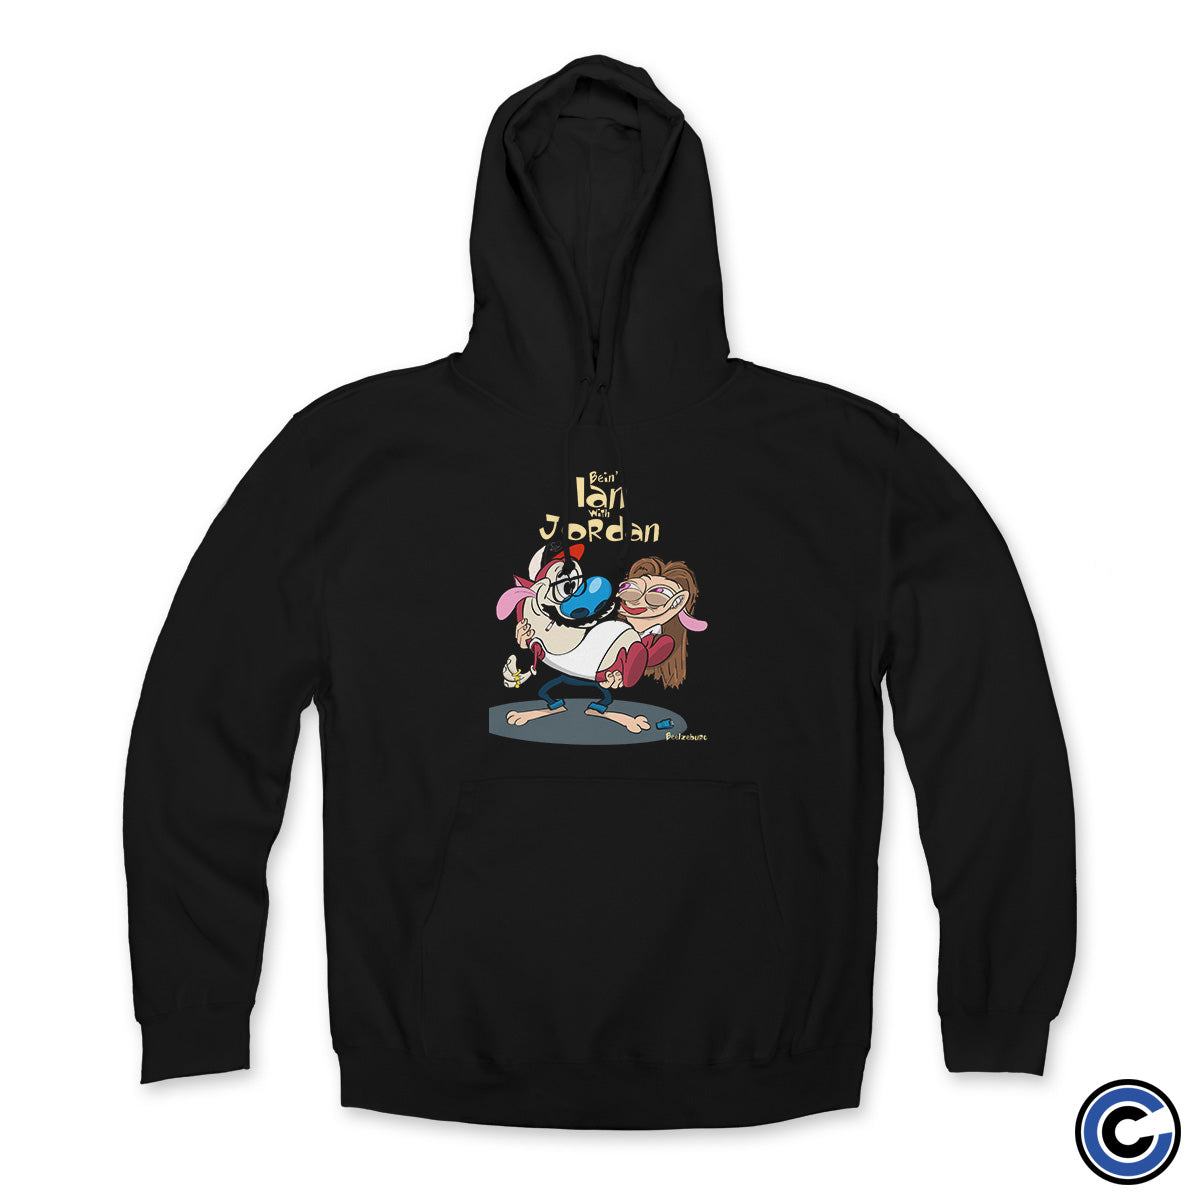 Bein' Ian with Jordan Podcast "Cigarettes And Cartoons" Hoodie